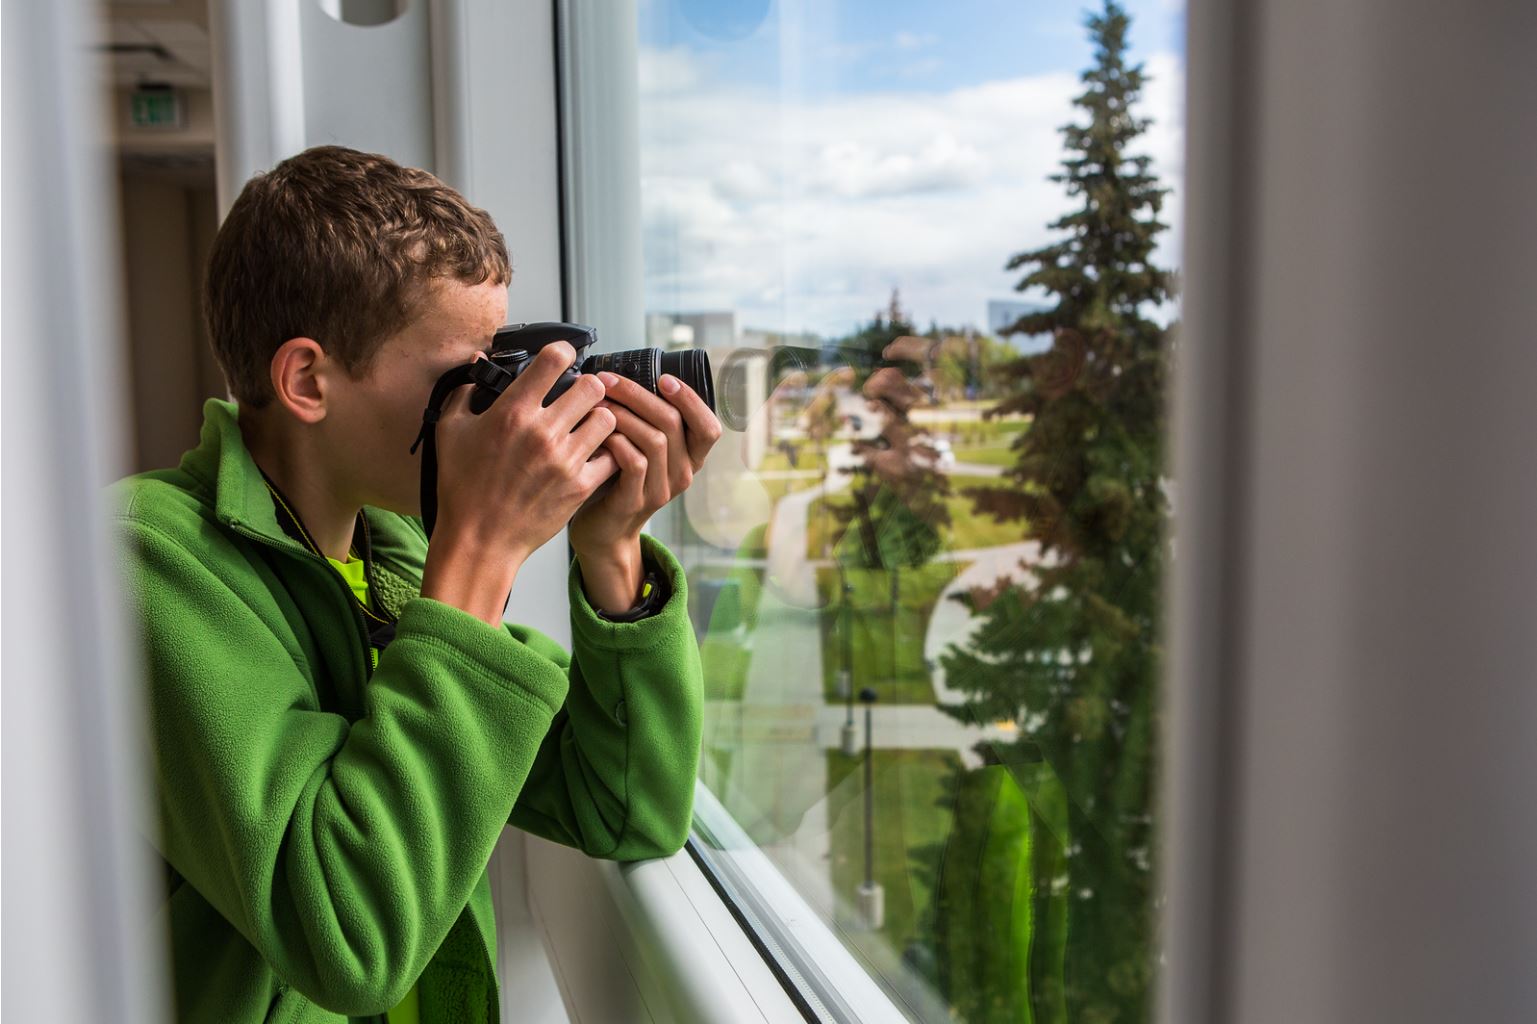 A student takes a photo out a window during the Summer Visual Arts Academy photography class